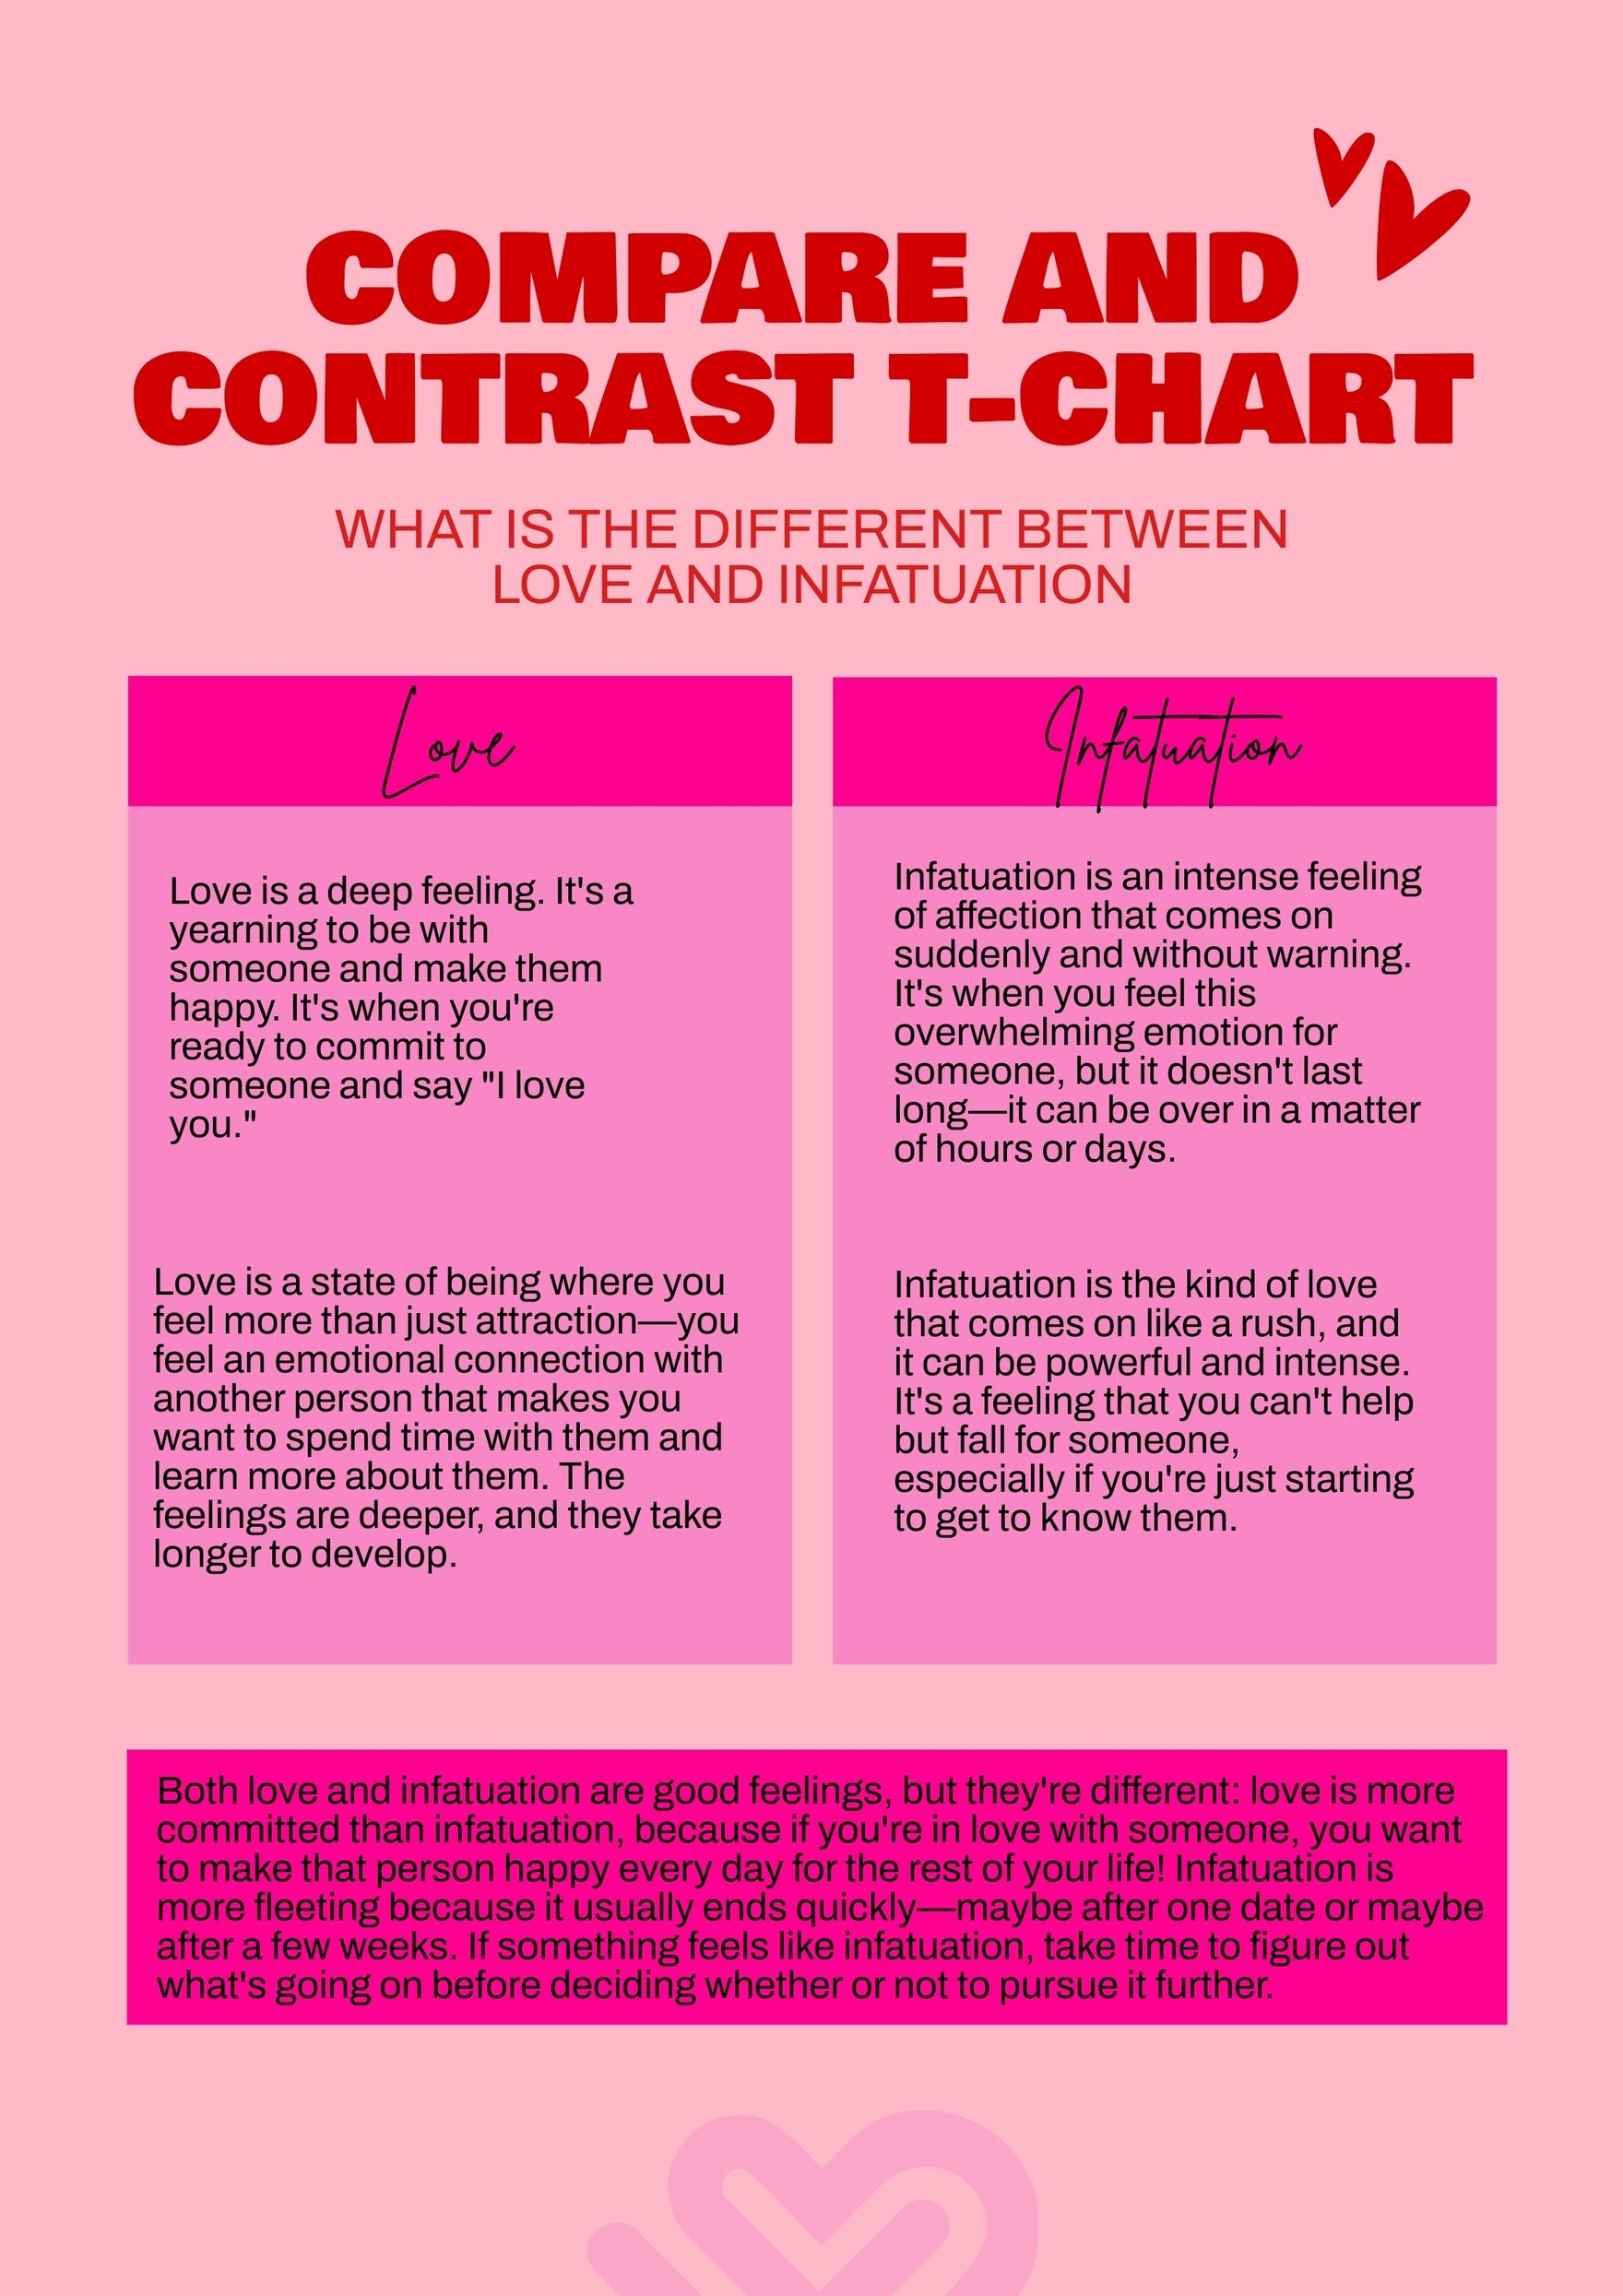 Compare and Contrast T-Chart